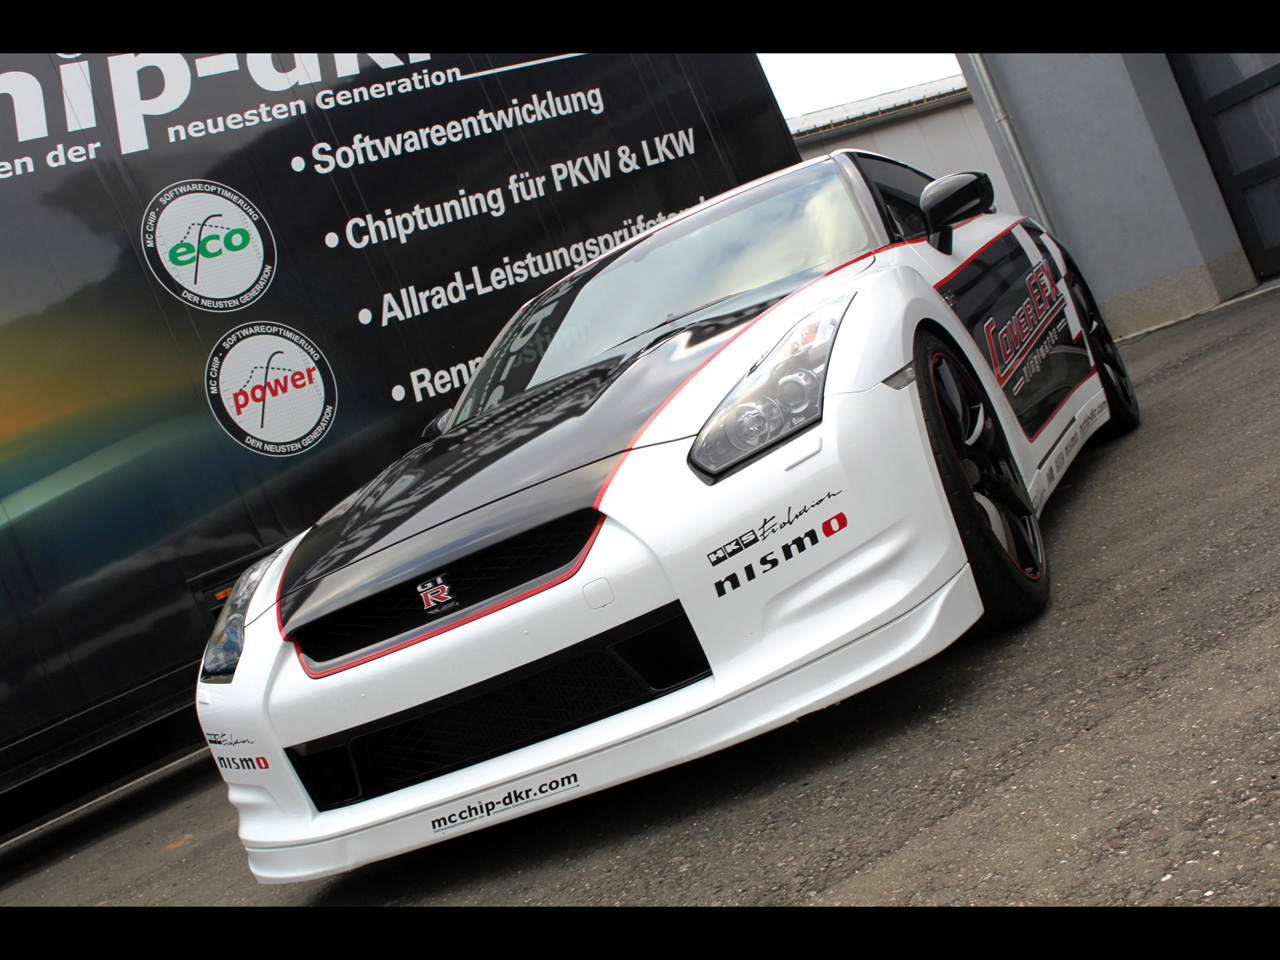 2012 Nissan R35 GT-R by mcchip-dkr and CoverEFX